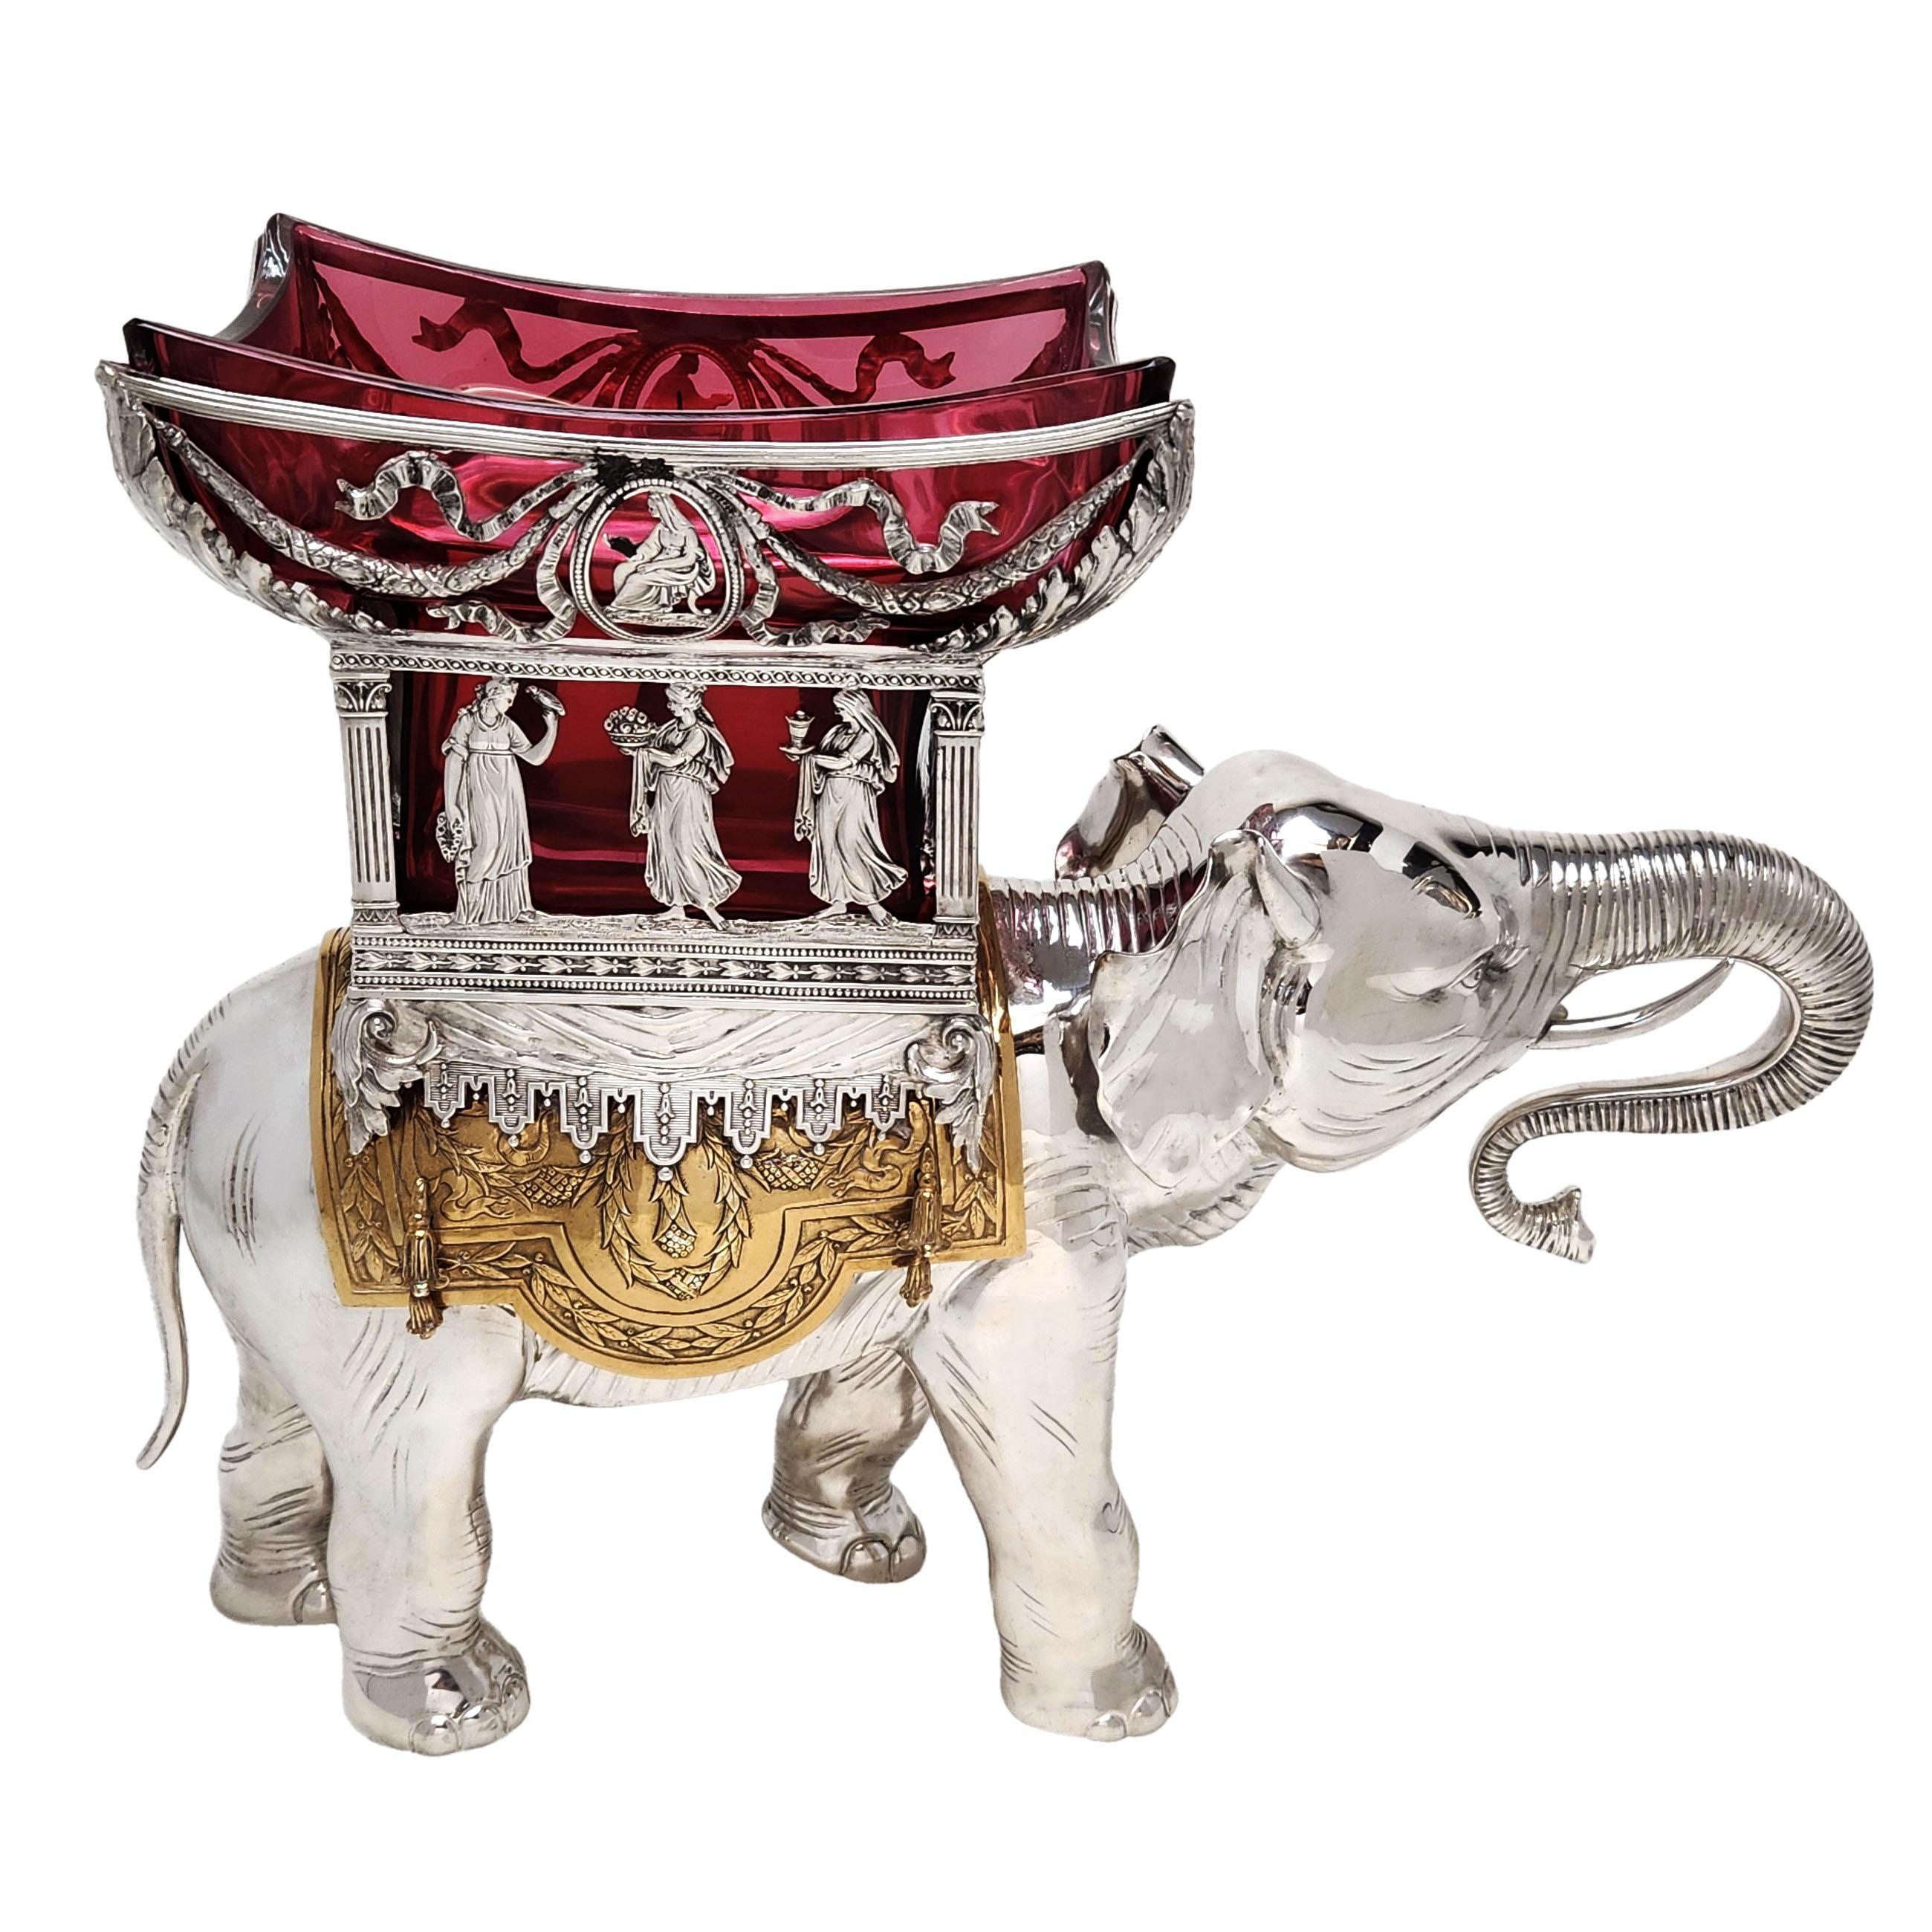 A magnificent solid silver elephant centrepiece supporting a gilt saddle with a large red glass bowl in a pierced Silver Basket. The basket features a band of classical figures and a swag and bow design with acanthus leaf corners and chased floral